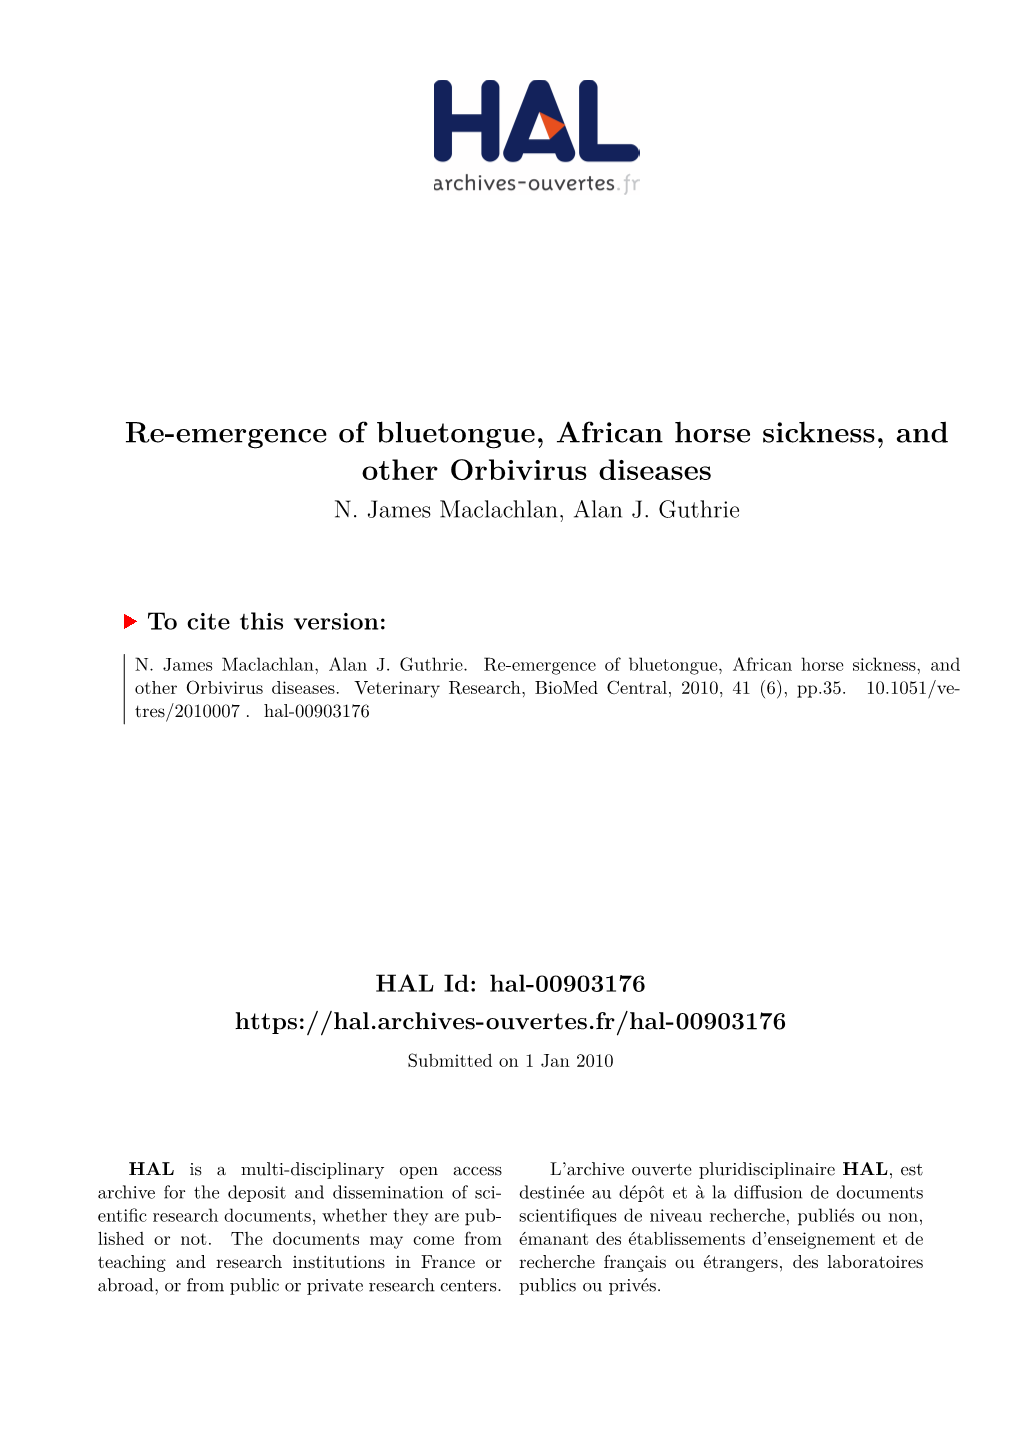 Re-Emergence of Bluetongue, African Horse Sickness, and Other Orbivirus Diseases N